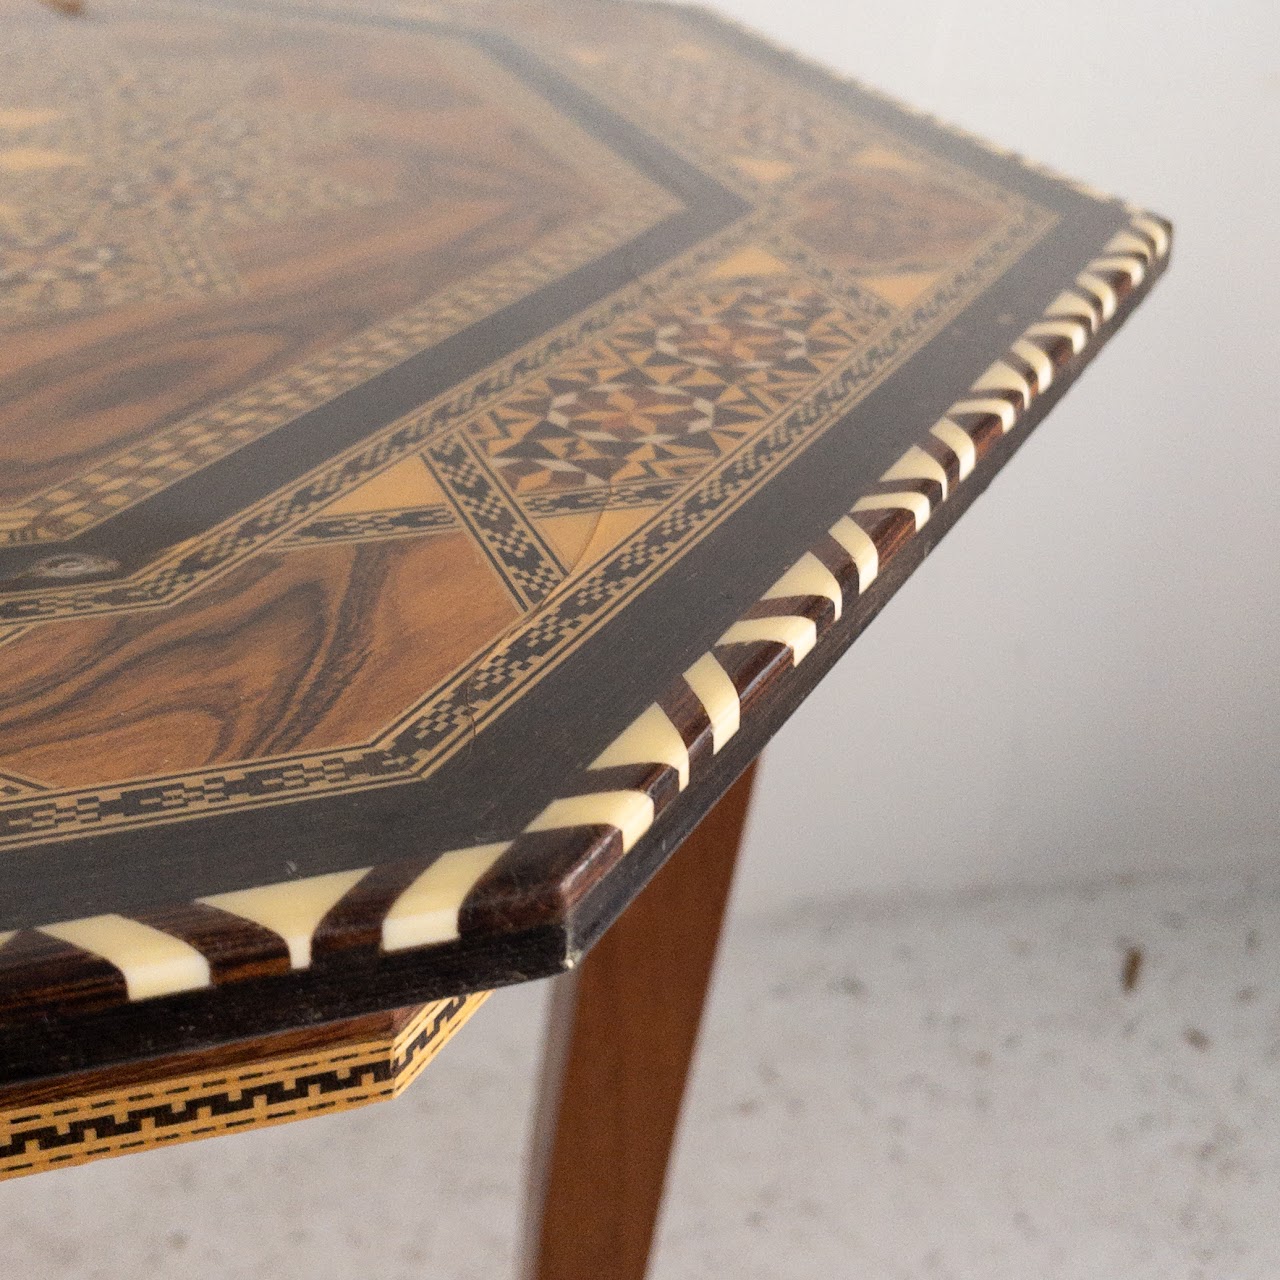 Marquetry Top Accent Table Pair